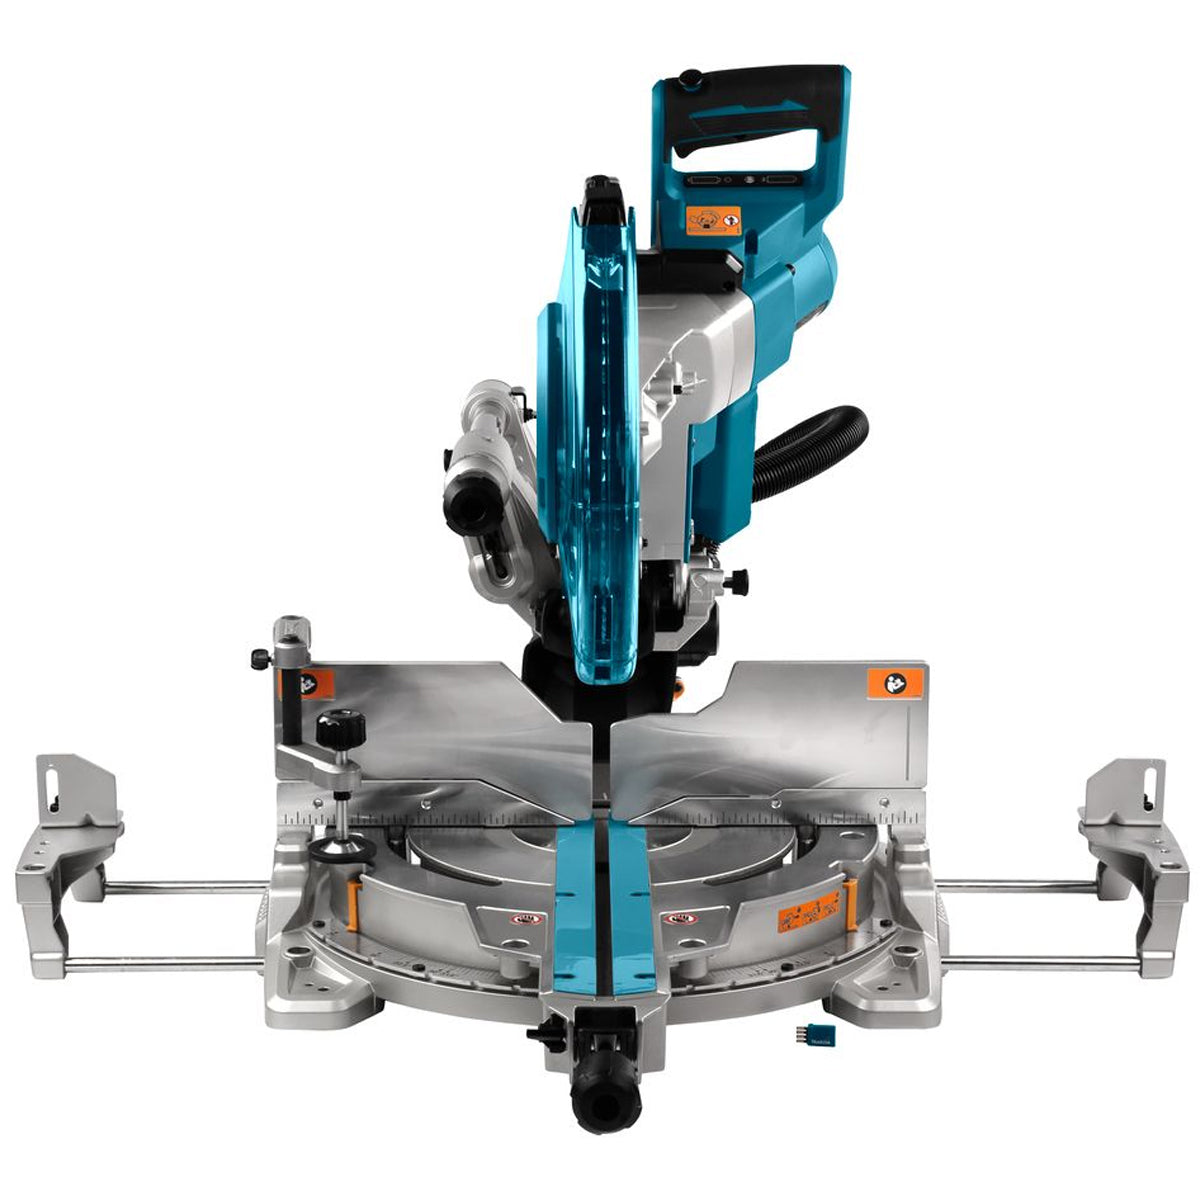 Makita LS003GZ01 40Vmax XGT Brushless 305mm Slide Compound Mitre Saw Body Only